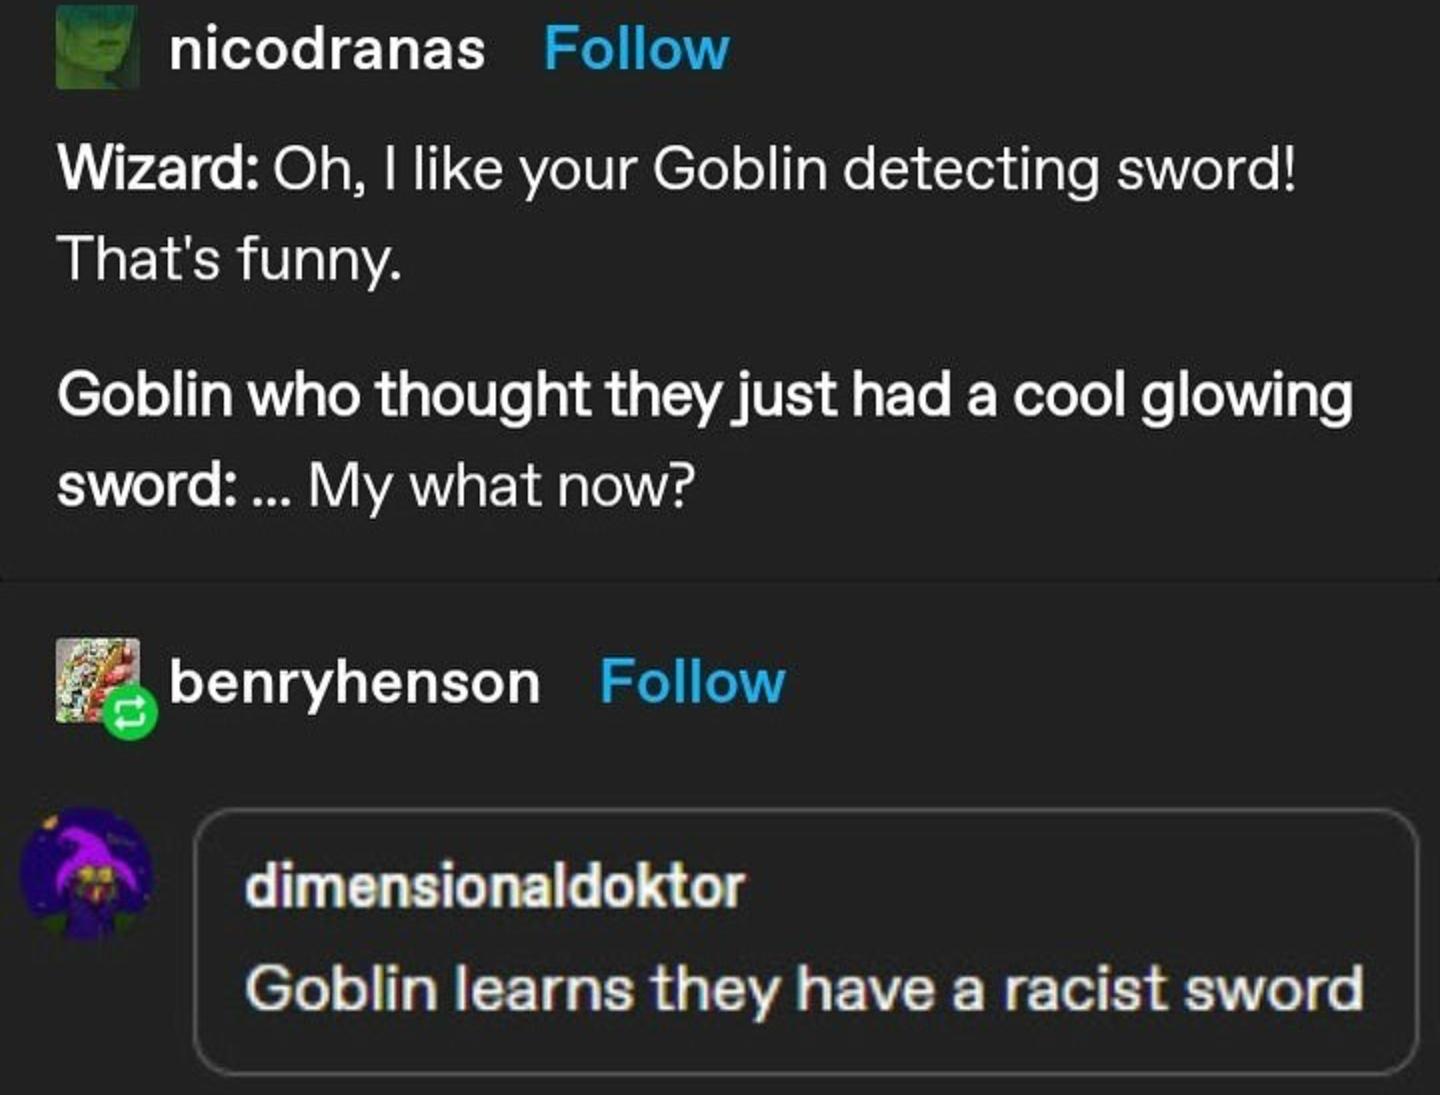 software - nicodranas Wizard Oh, I your Goblin detecting sword! That's funny. Goblin who thought they just had a cool glowing sword ... My what now? benryhenson dimensionaldoktor Goblin learns they have a racist sword